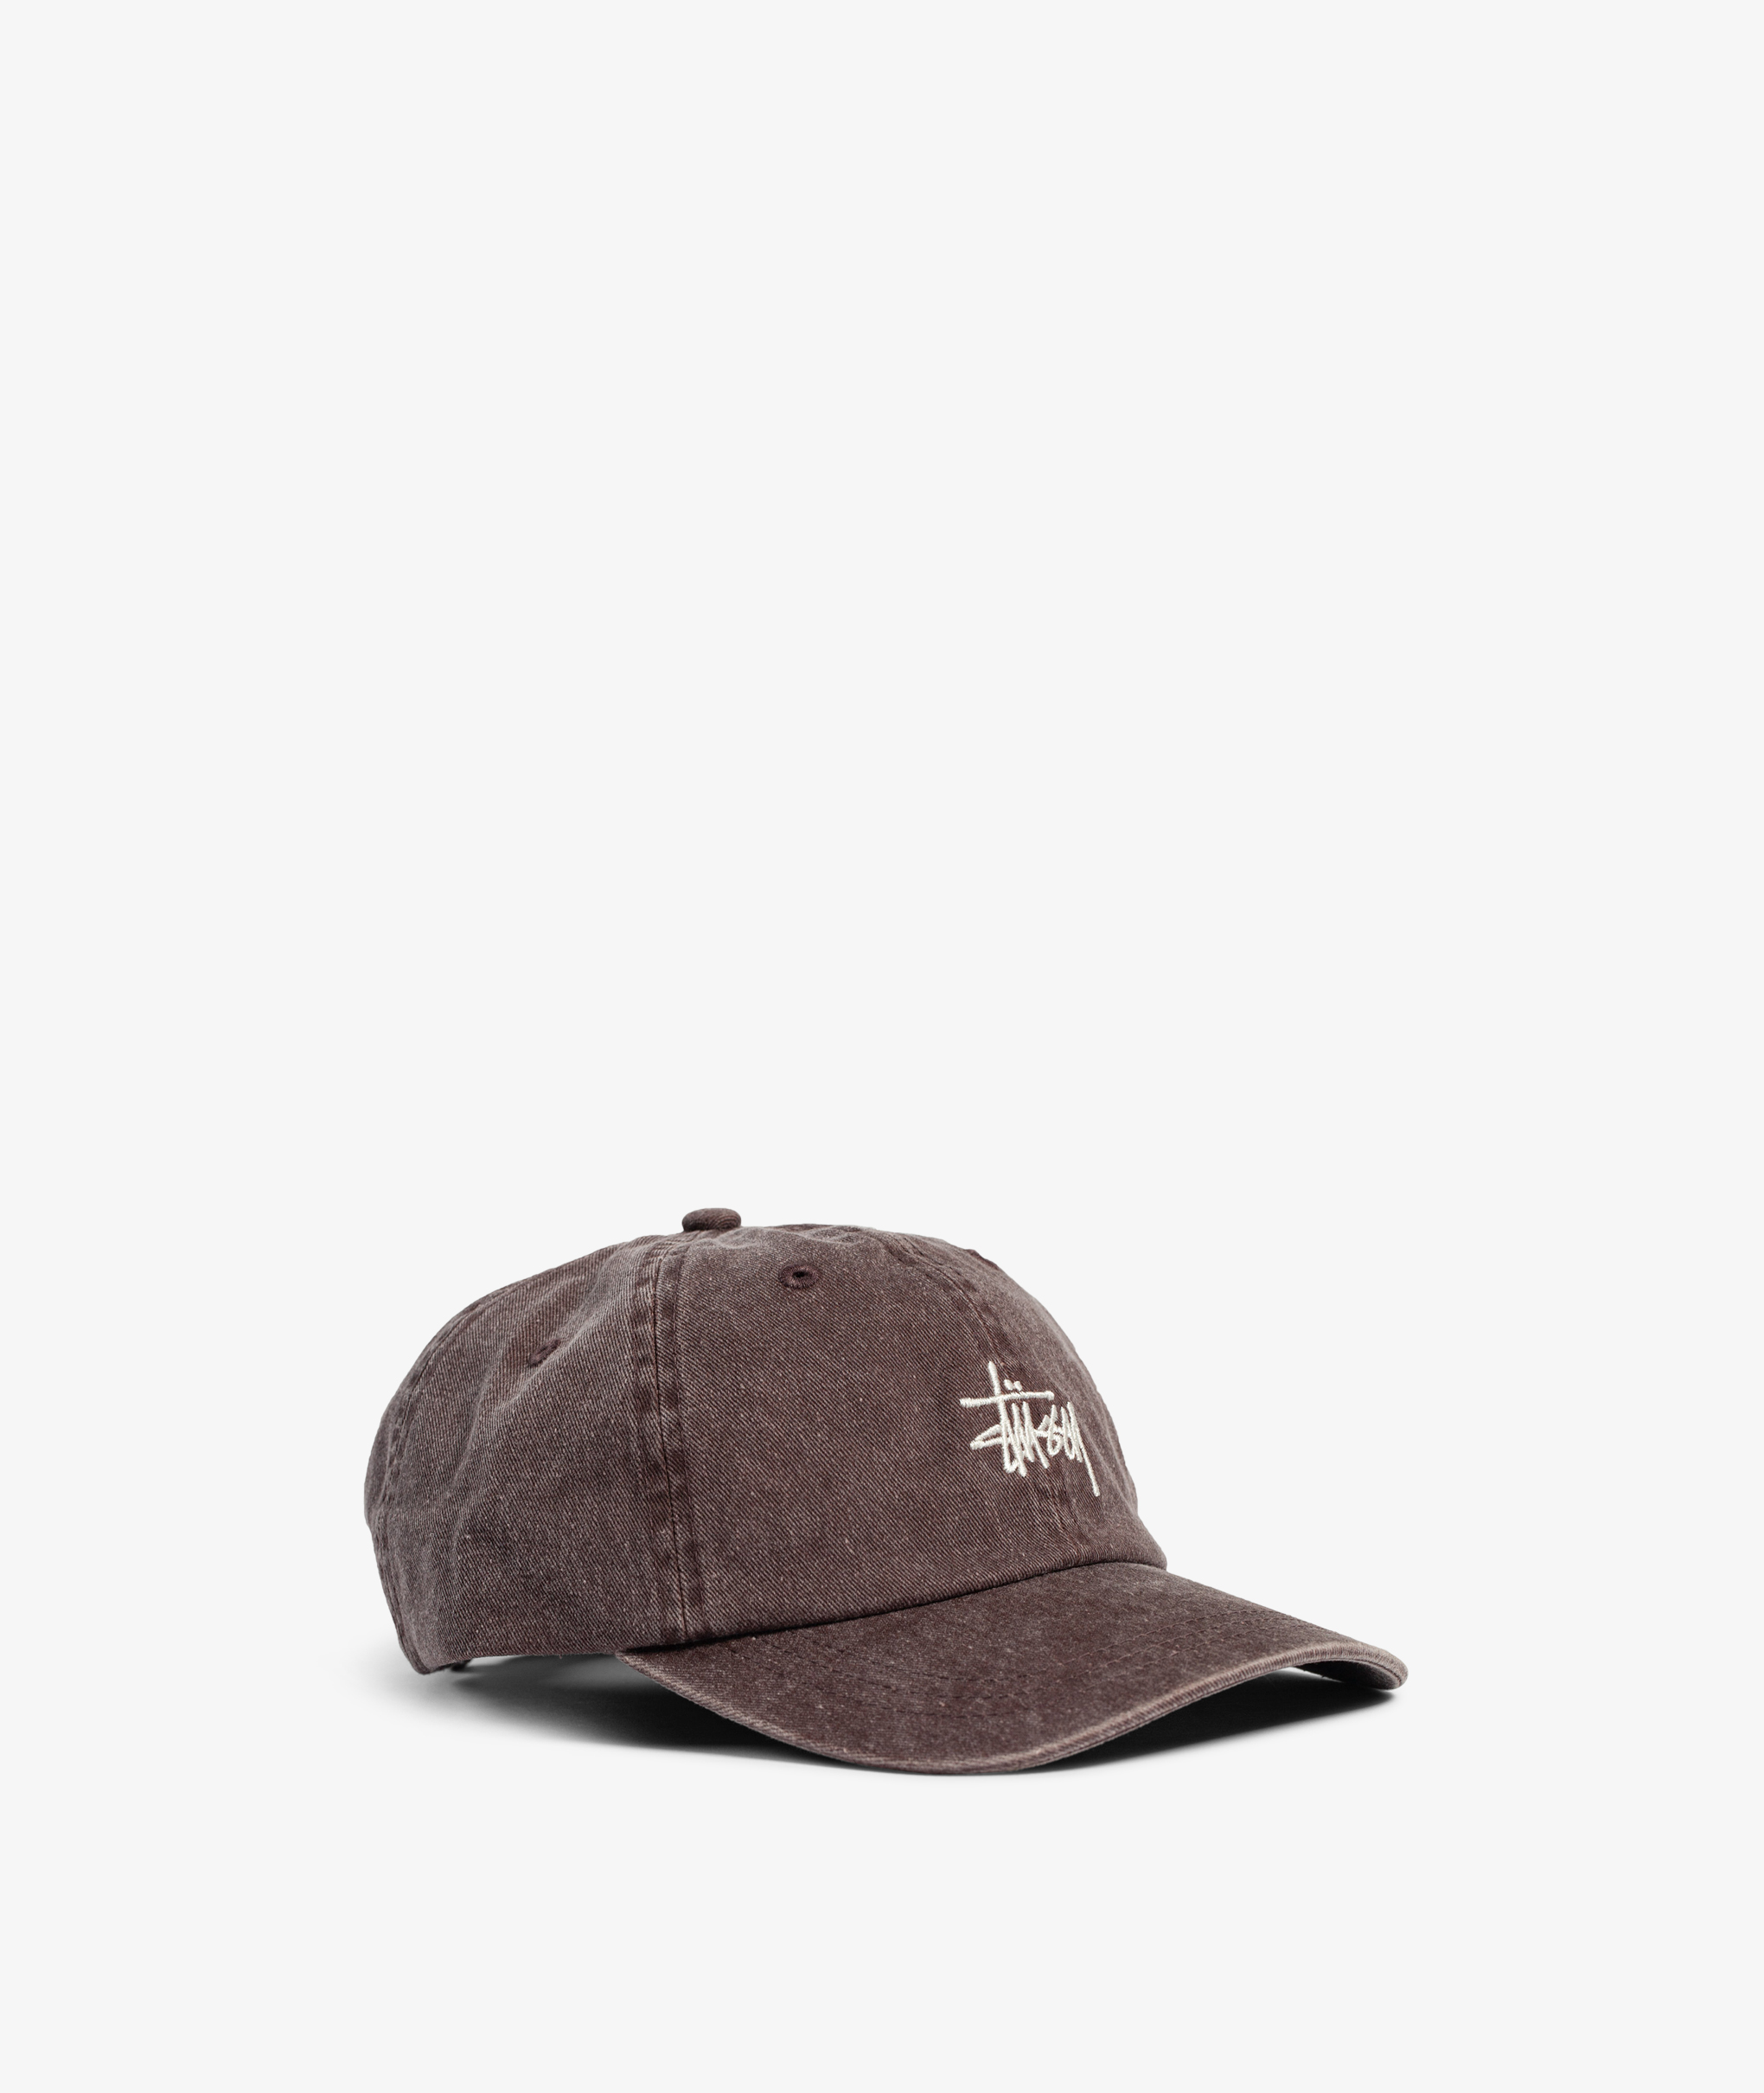 Norse Store | Shipping Worldwide - Stüssy Washed Stock Low Pro Cap